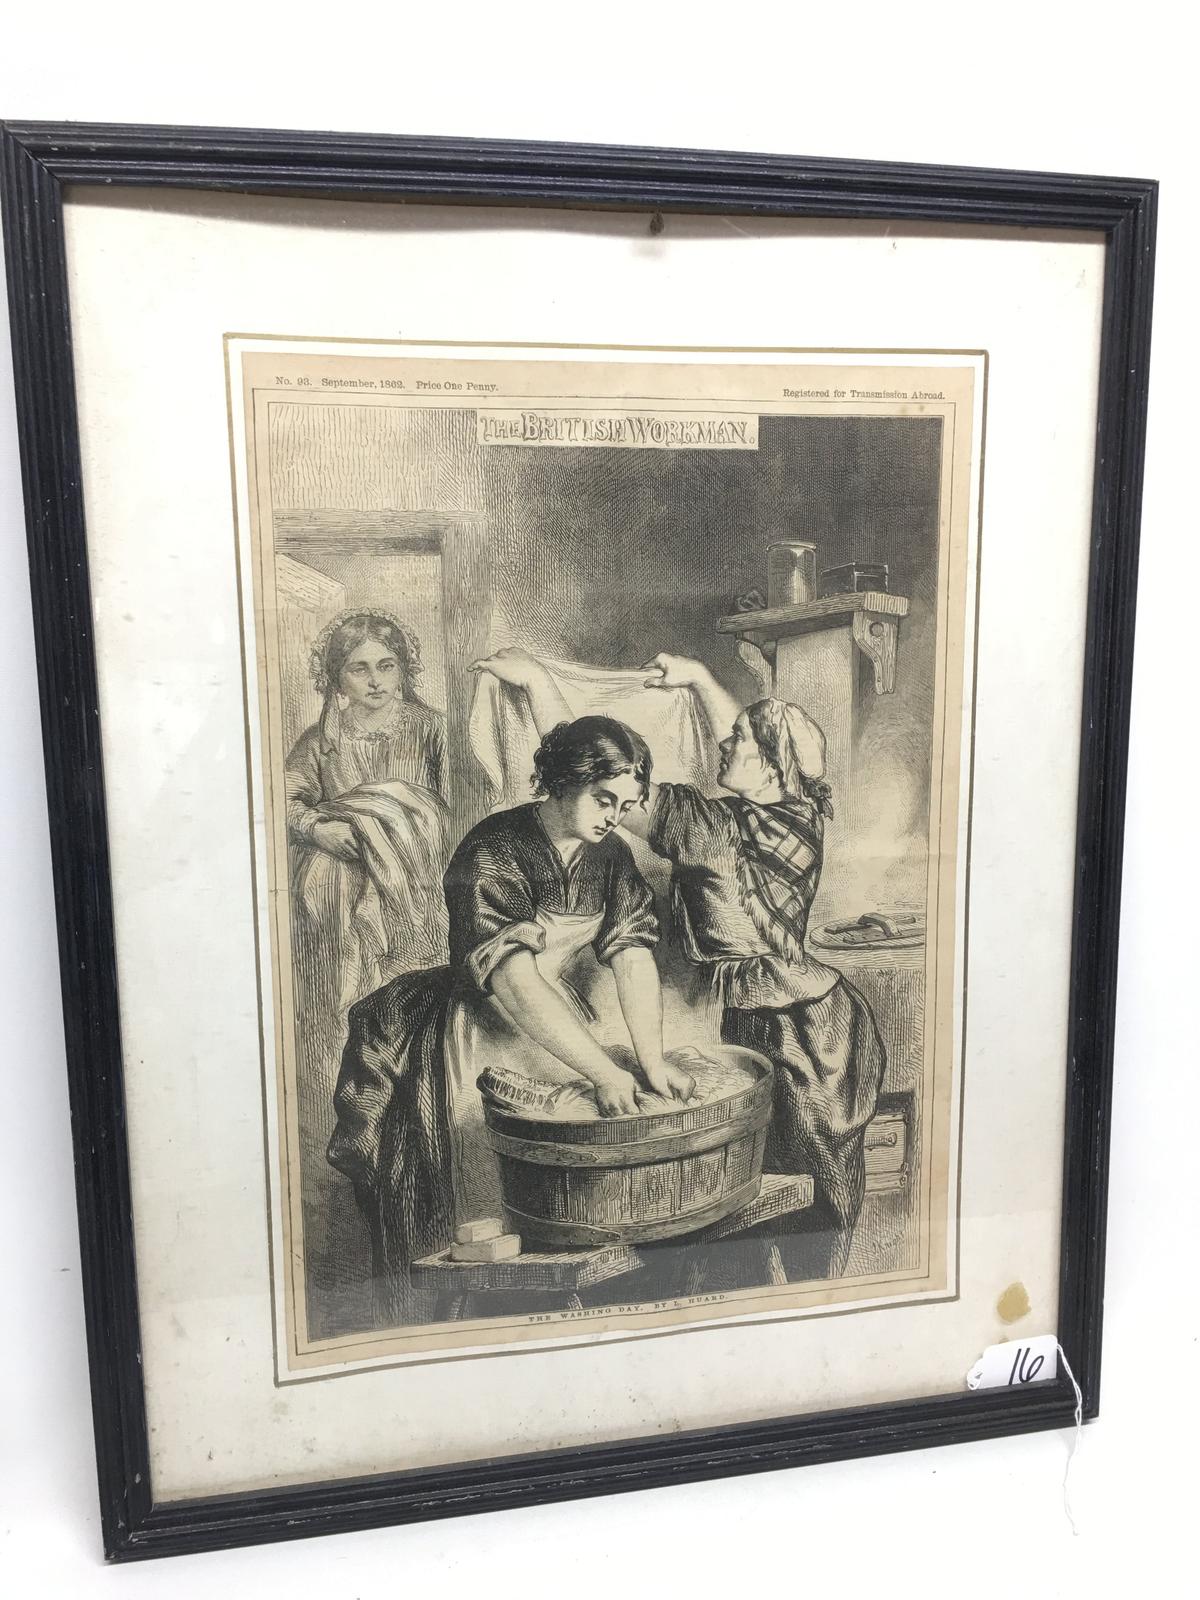 Antique Framed Print Titled "Washday" By L. Huard Is Dated 1862